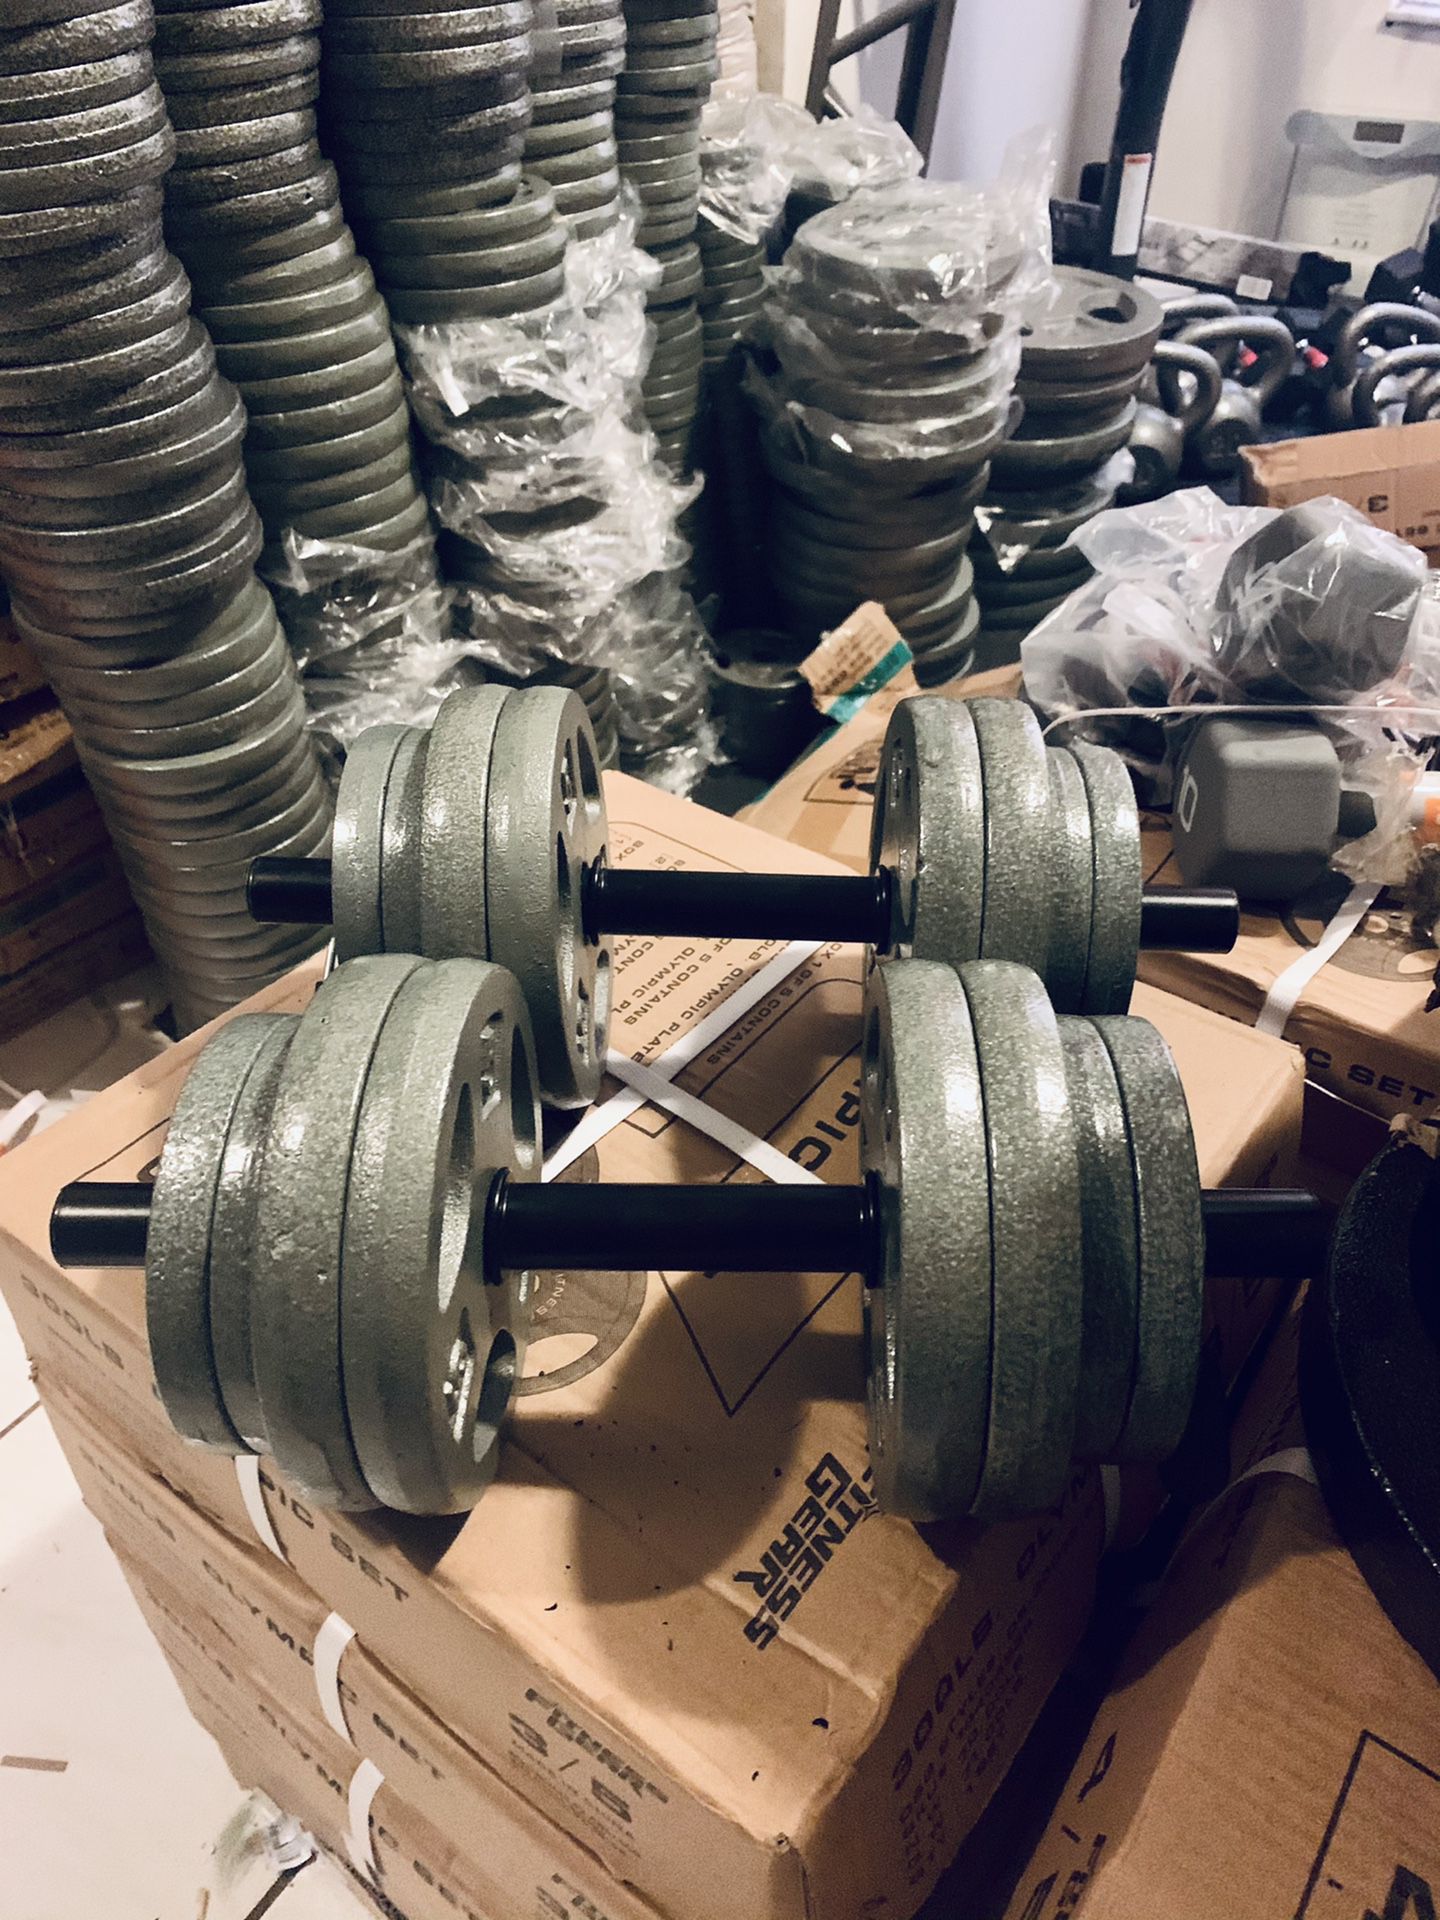 Custom size adjustable dumbbells ($2 per pound and cost of handles)